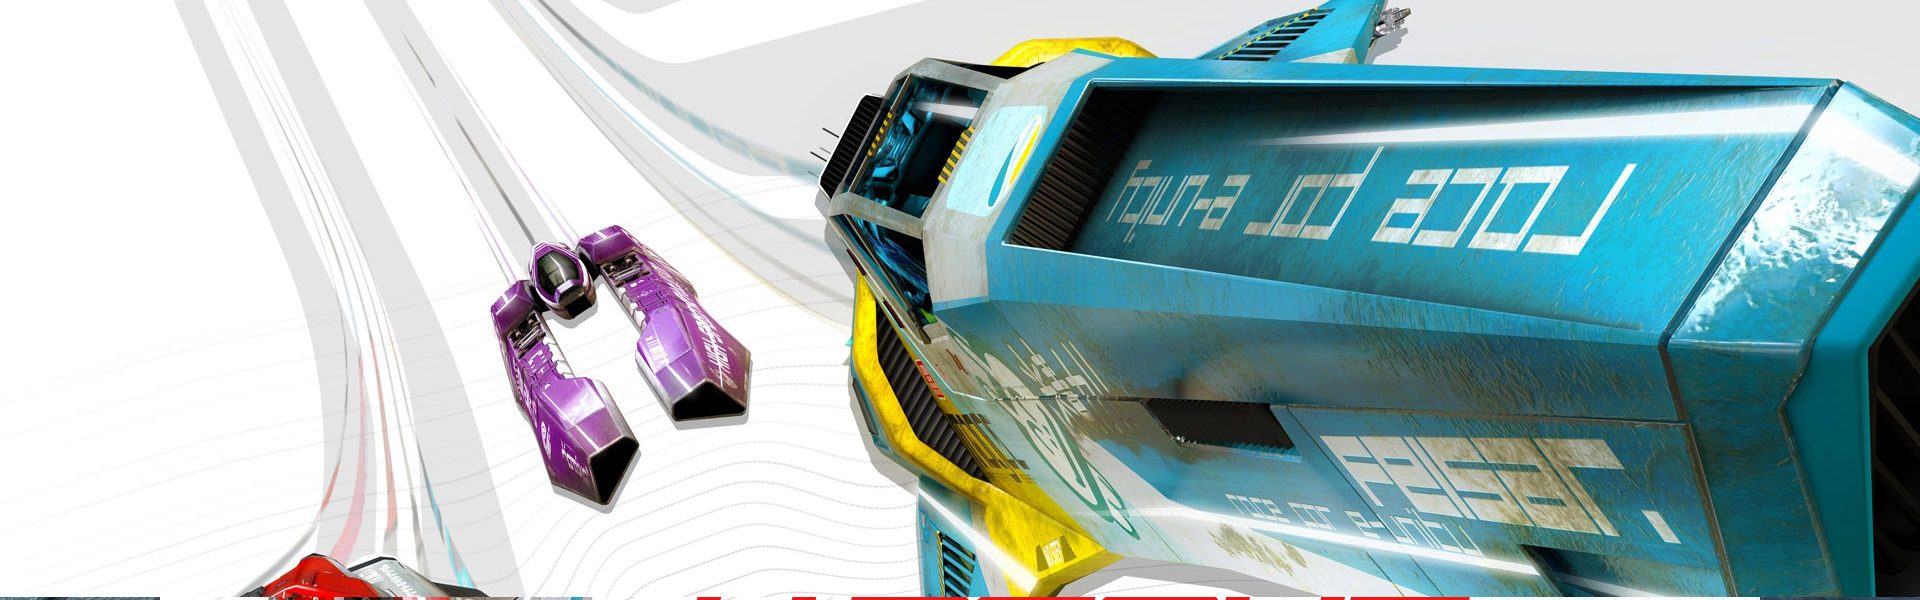 wipeout omega vr